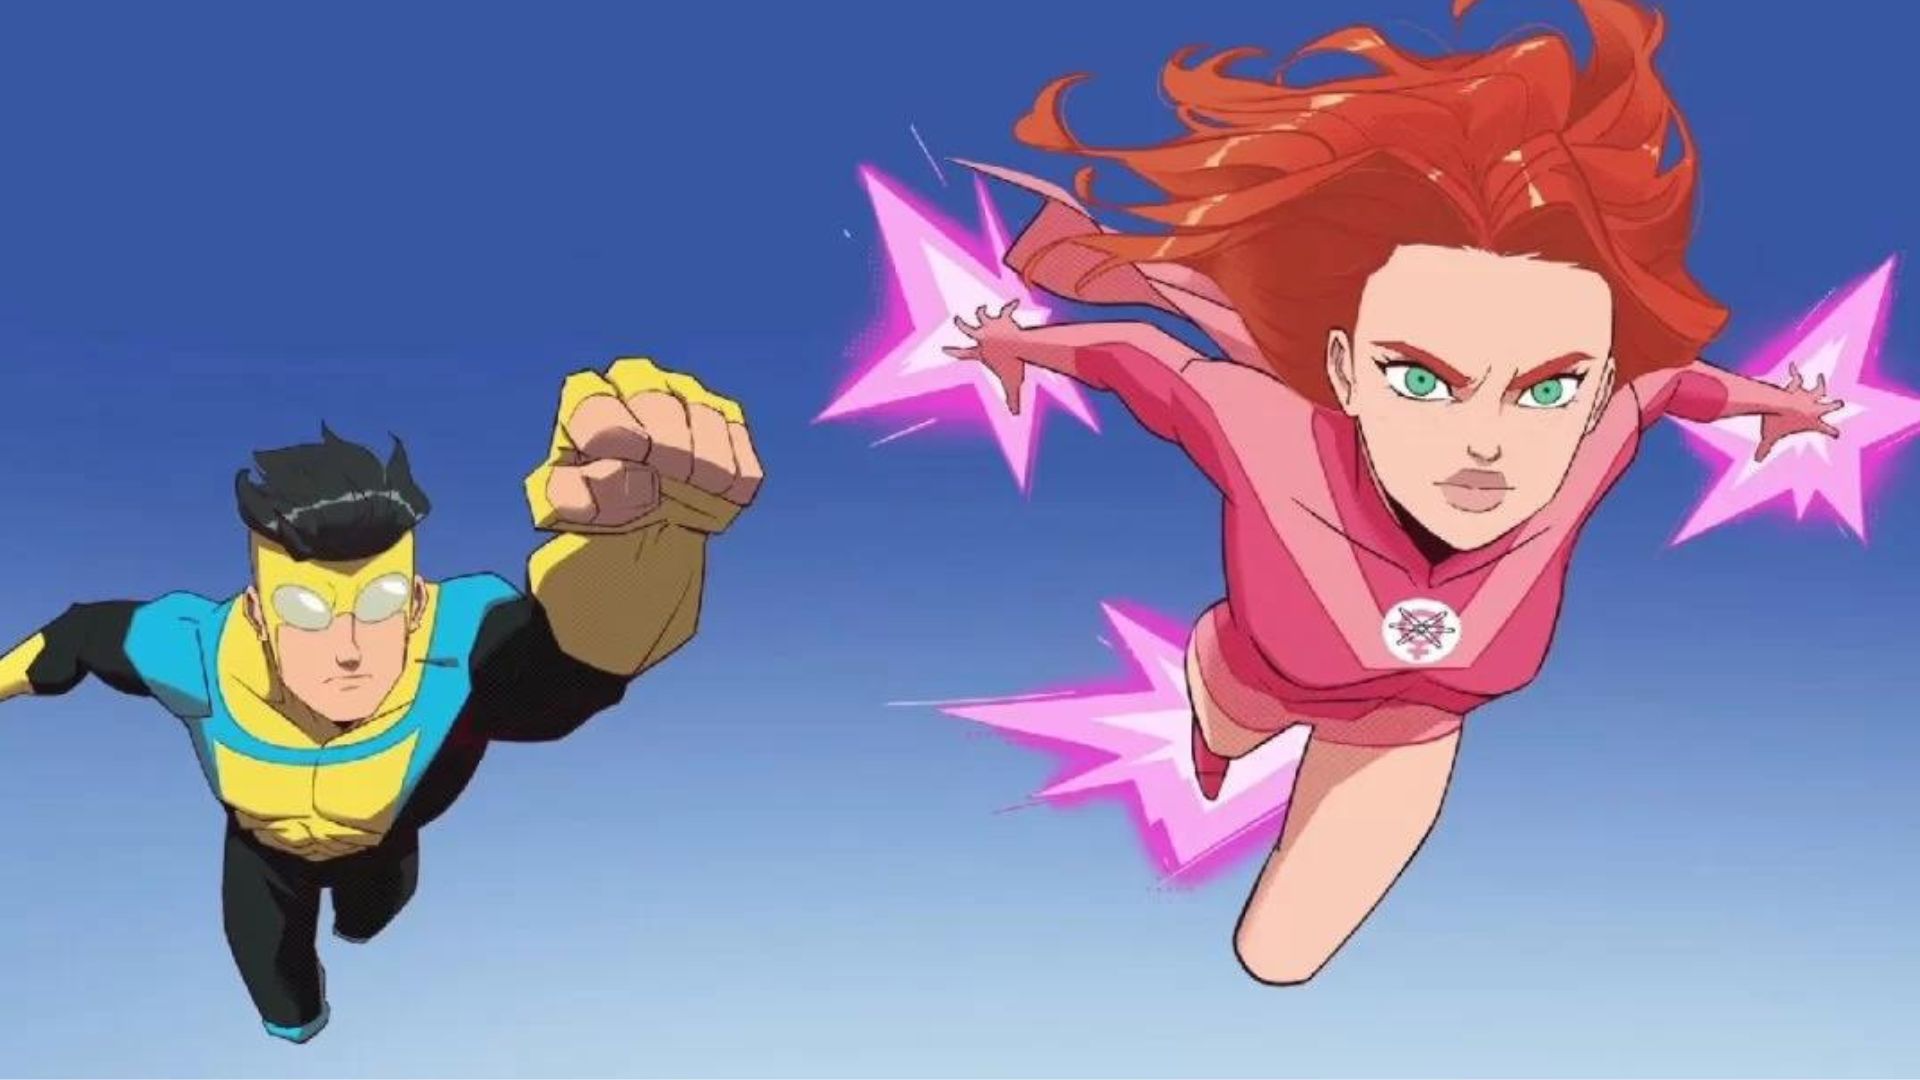 Invincible Season 2 Update Will Atom Eve Survive the Latest Twists-----